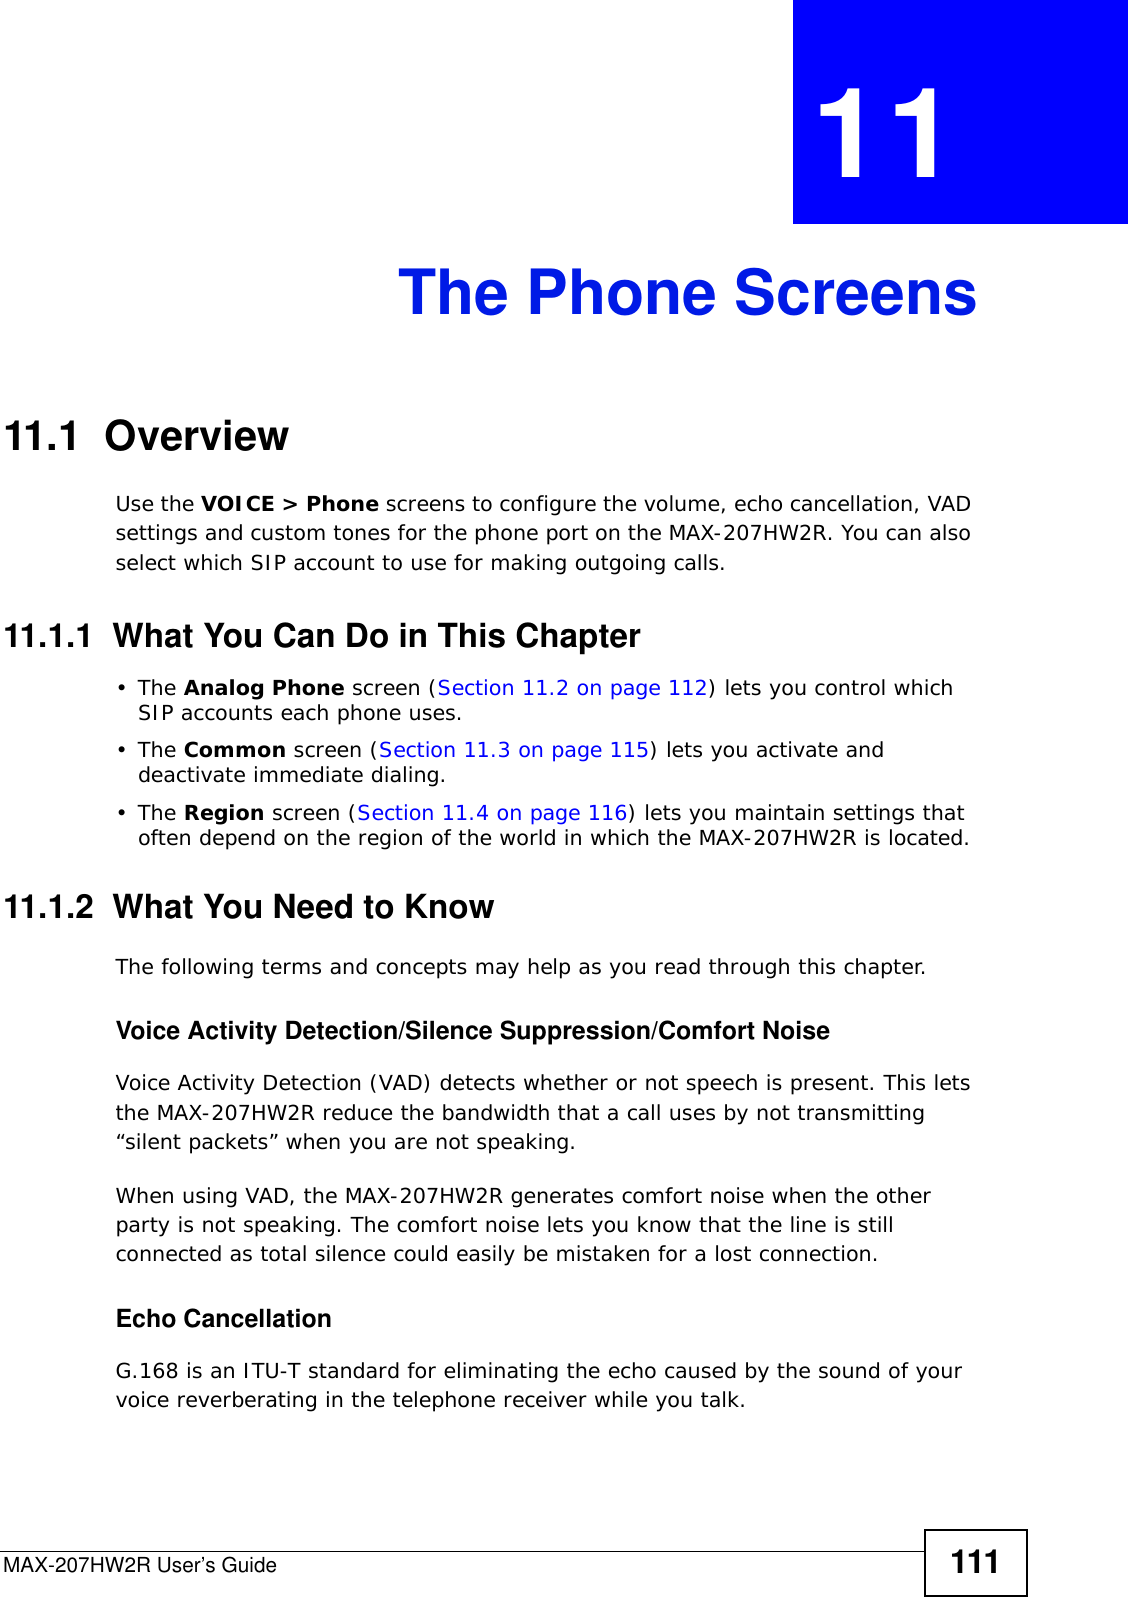 MAX-207HW2R User’s Guide 111CHAPTER  11 The Phone Screens11.1  OverviewUse the VOICE &gt; Phone screens to configure the volume, echo cancellation, VAD settings and custom tones for the phone port on the MAX-207HW2R. You can also select which SIP account to use for making outgoing calls.11.1.1  What You Can Do in This Chapter•The Analog Phone screen (Section 11.2 on page 112) lets you control which SIP accounts each phone uses.•The Common screen (Section 11.3 on page 115) lets you activate and deactivate immediate dialing.•The Region screen (Section 11.4 on page 116) lets you maintain settings that often depend on the region of the world in which the MAX-207HW2R is located.11.1.2  What You Need to KnowThe following terms and concepts may help as you read through this chapter.Voice Activity Detection/Silence Suppression/Comfort NoiseVoice Activity Detection (VAD) detects whether or not speech is present. This lets the MAX-207HW2R reduce the bandwidth that a call uses by not transmitting “silent packets” when you are not speaking.When using VAD, the MAX-207HW2R generates comfort noise when the other party is not speaking. The comfort noise lets you know that the line is still connected as total silence could easily be mistaken for a lost connection.Echo Cancellation G.168 is an ITU-T standard for eliminating the echo caused by the sound of your voice reverberating in the telephone receiver while you talk.